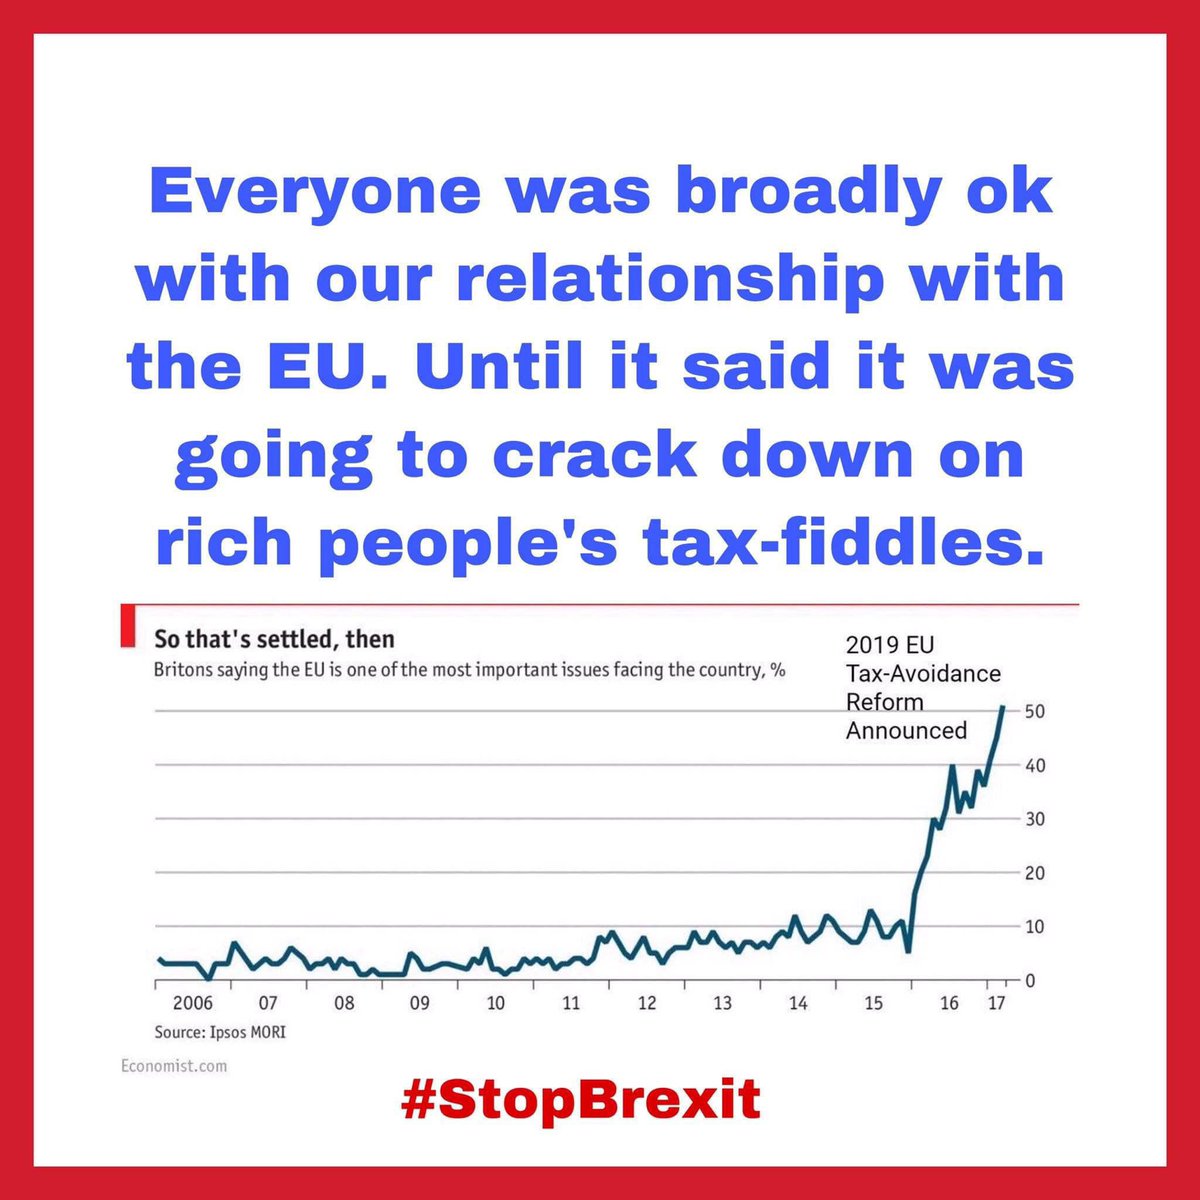 #brexitreality #brexidiots filthy rich tax dodging #toryscum